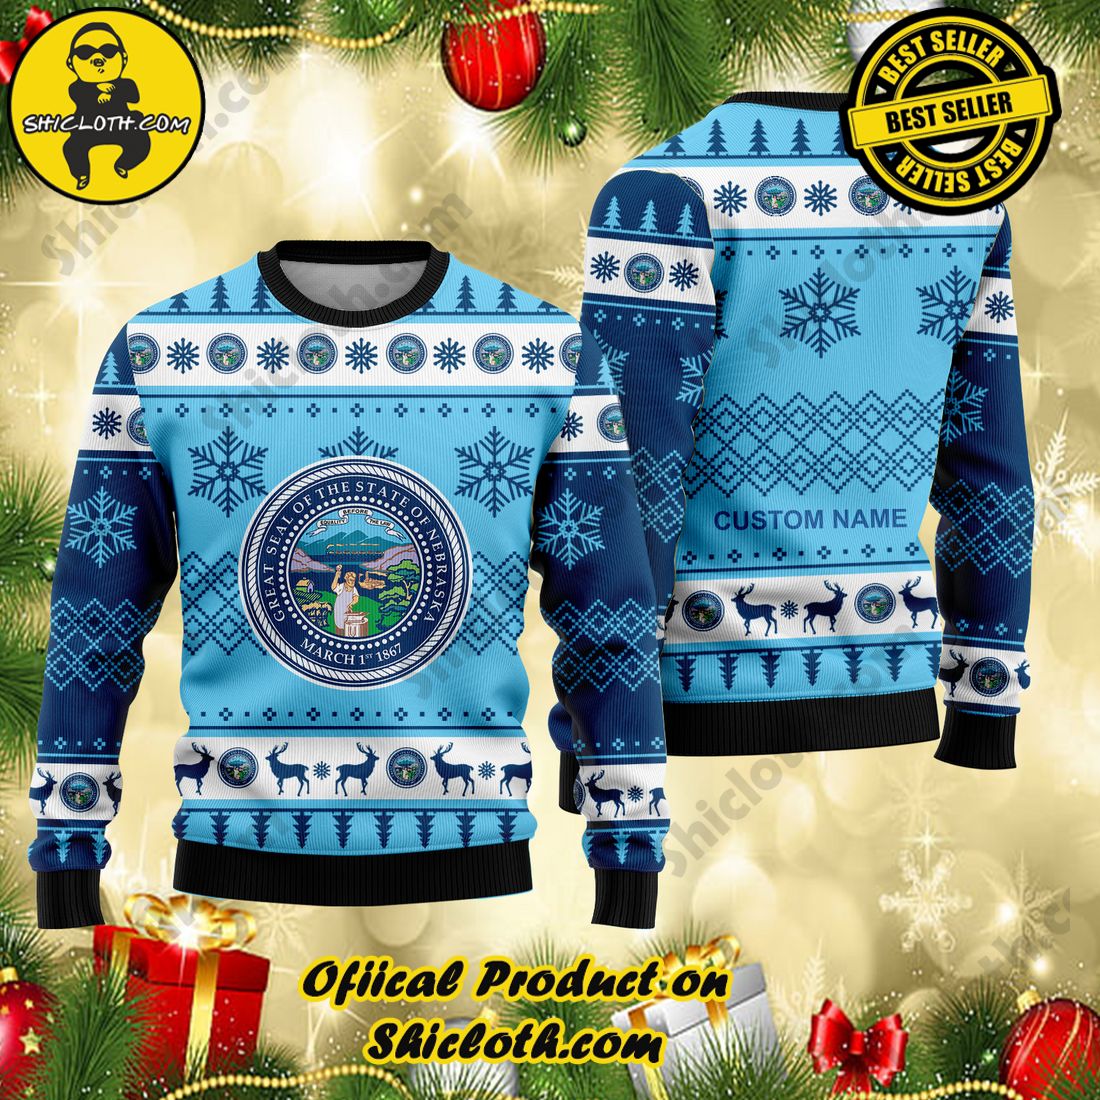 La Chargers Nfl Personalized Name Number Ugly Christmas Sweater